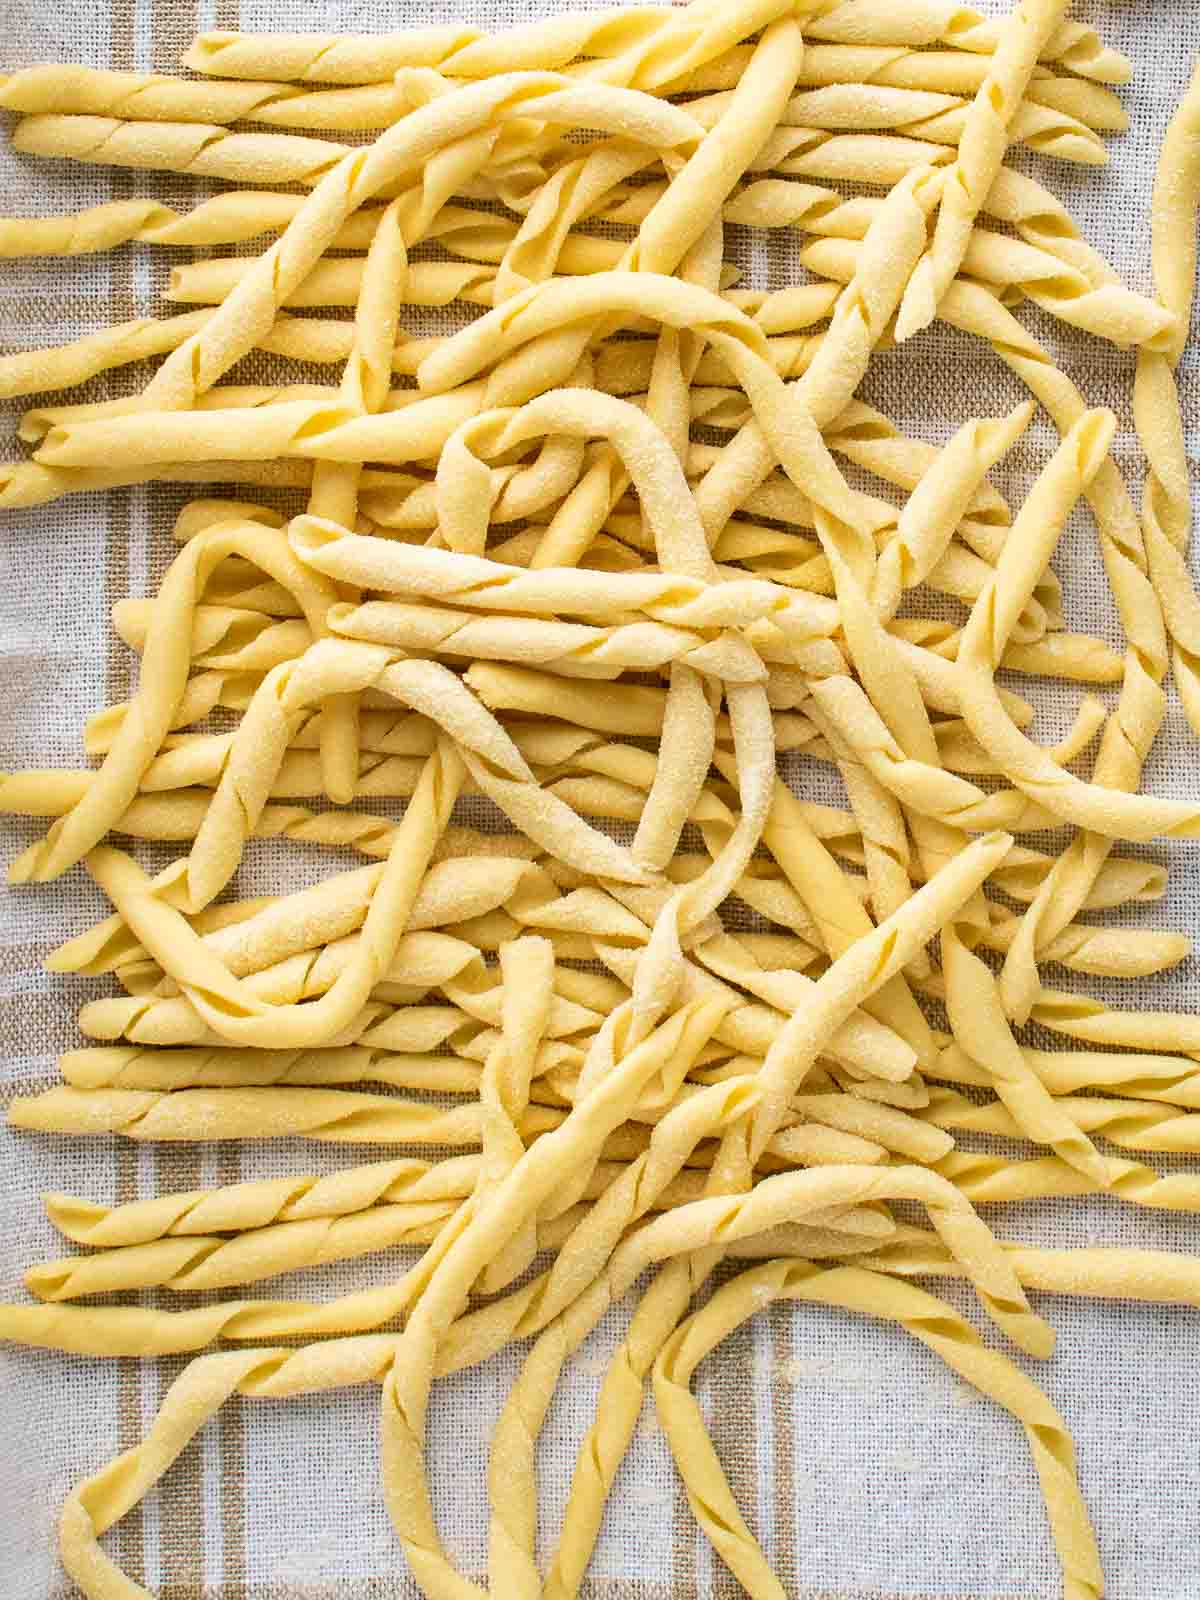 Busiate pasta on a kitchen towel viewed from above.